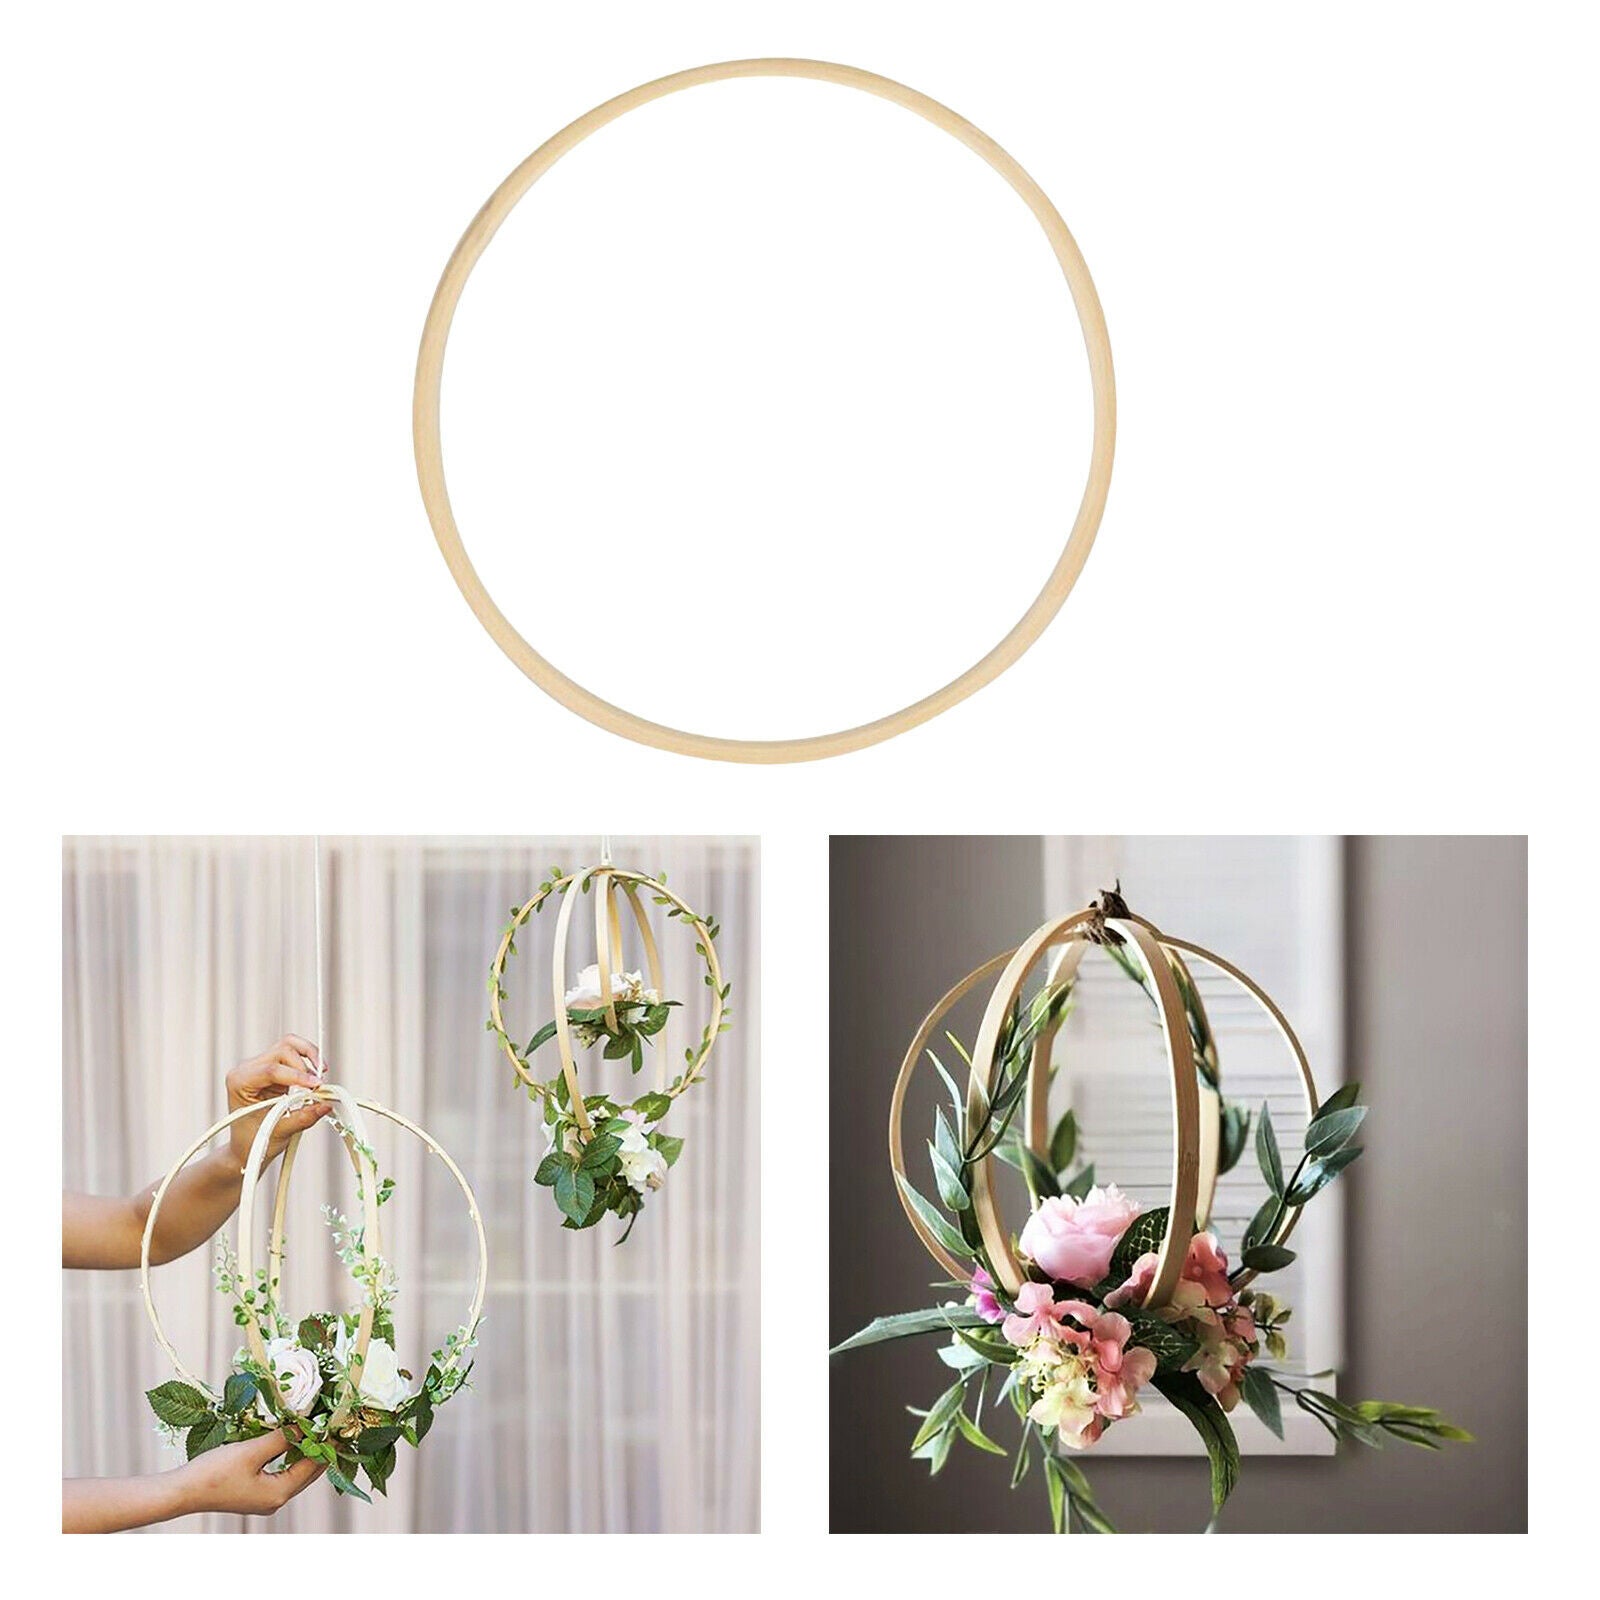 6Pcs Wooden Embroidery Hoops Bamboo Macrame Ring Frame for Dreamcatcher Wedding